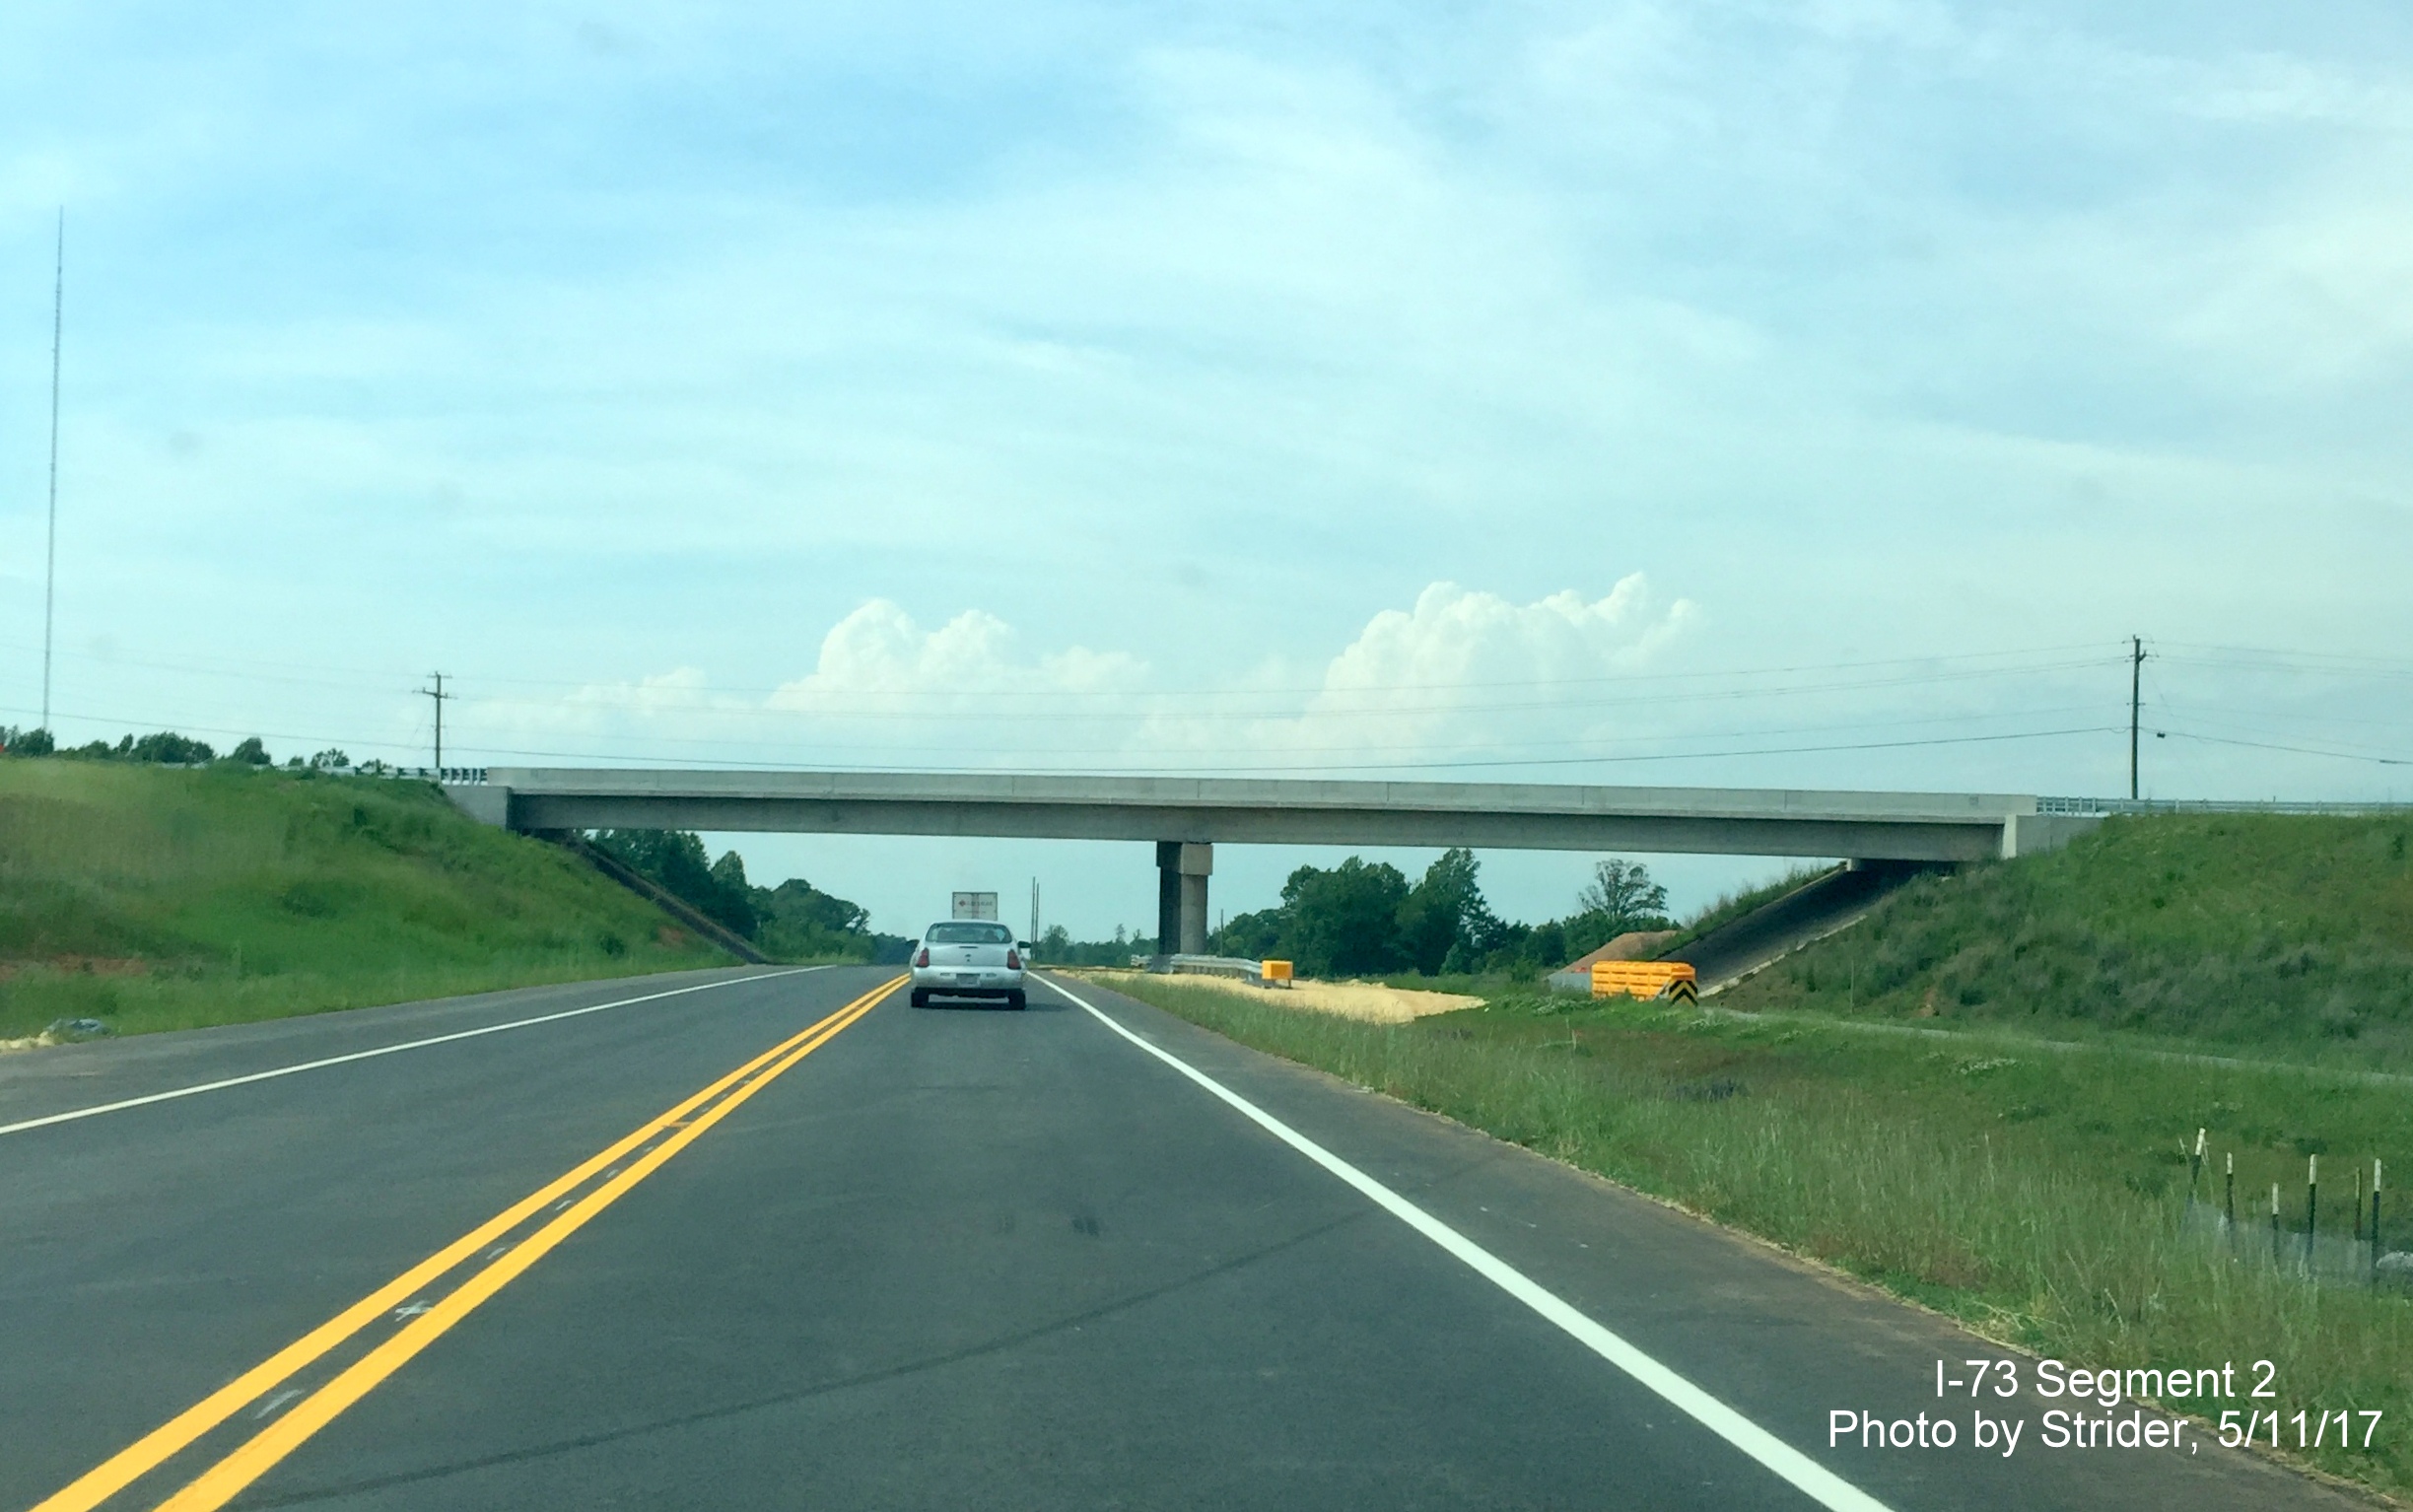 Image of recently completed NC 65 bridge from US 220 North using Future I-73 South lanes, from Strider